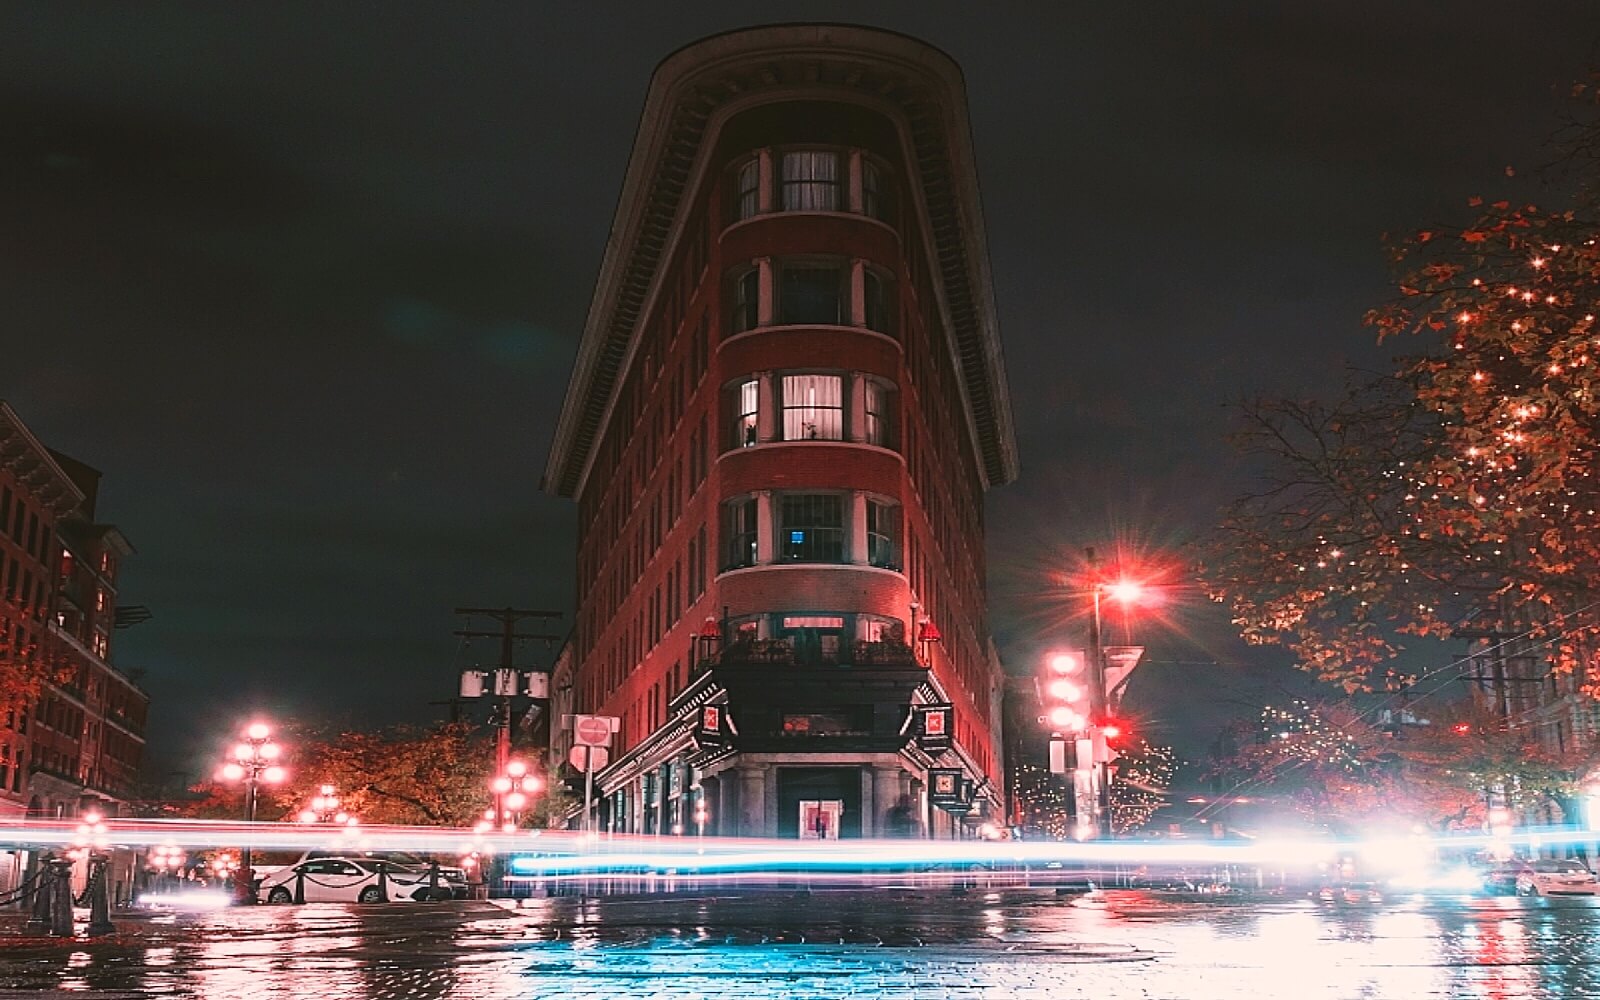 The Flatiron Building in Gastown, Vancouver